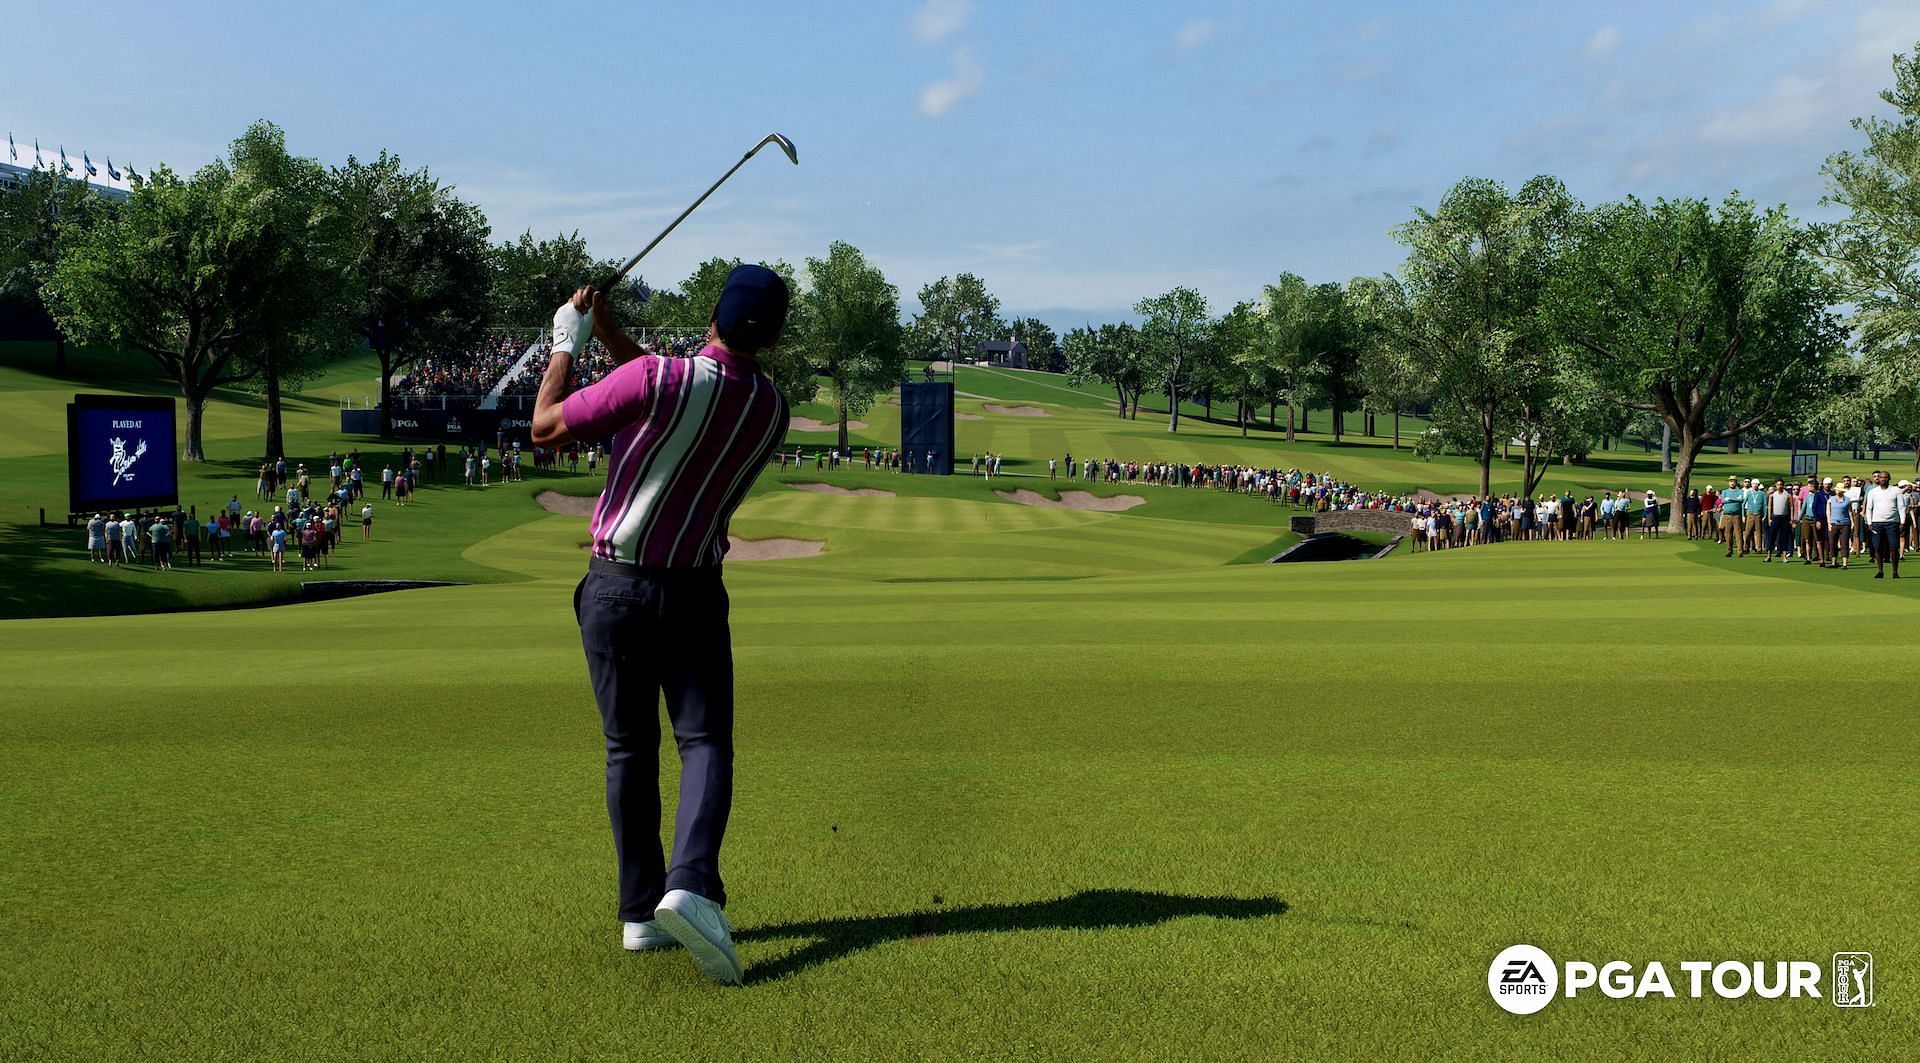 Complete challenges in EA Sports PGA Tour to acquire XP faster (Image via EA Sports)